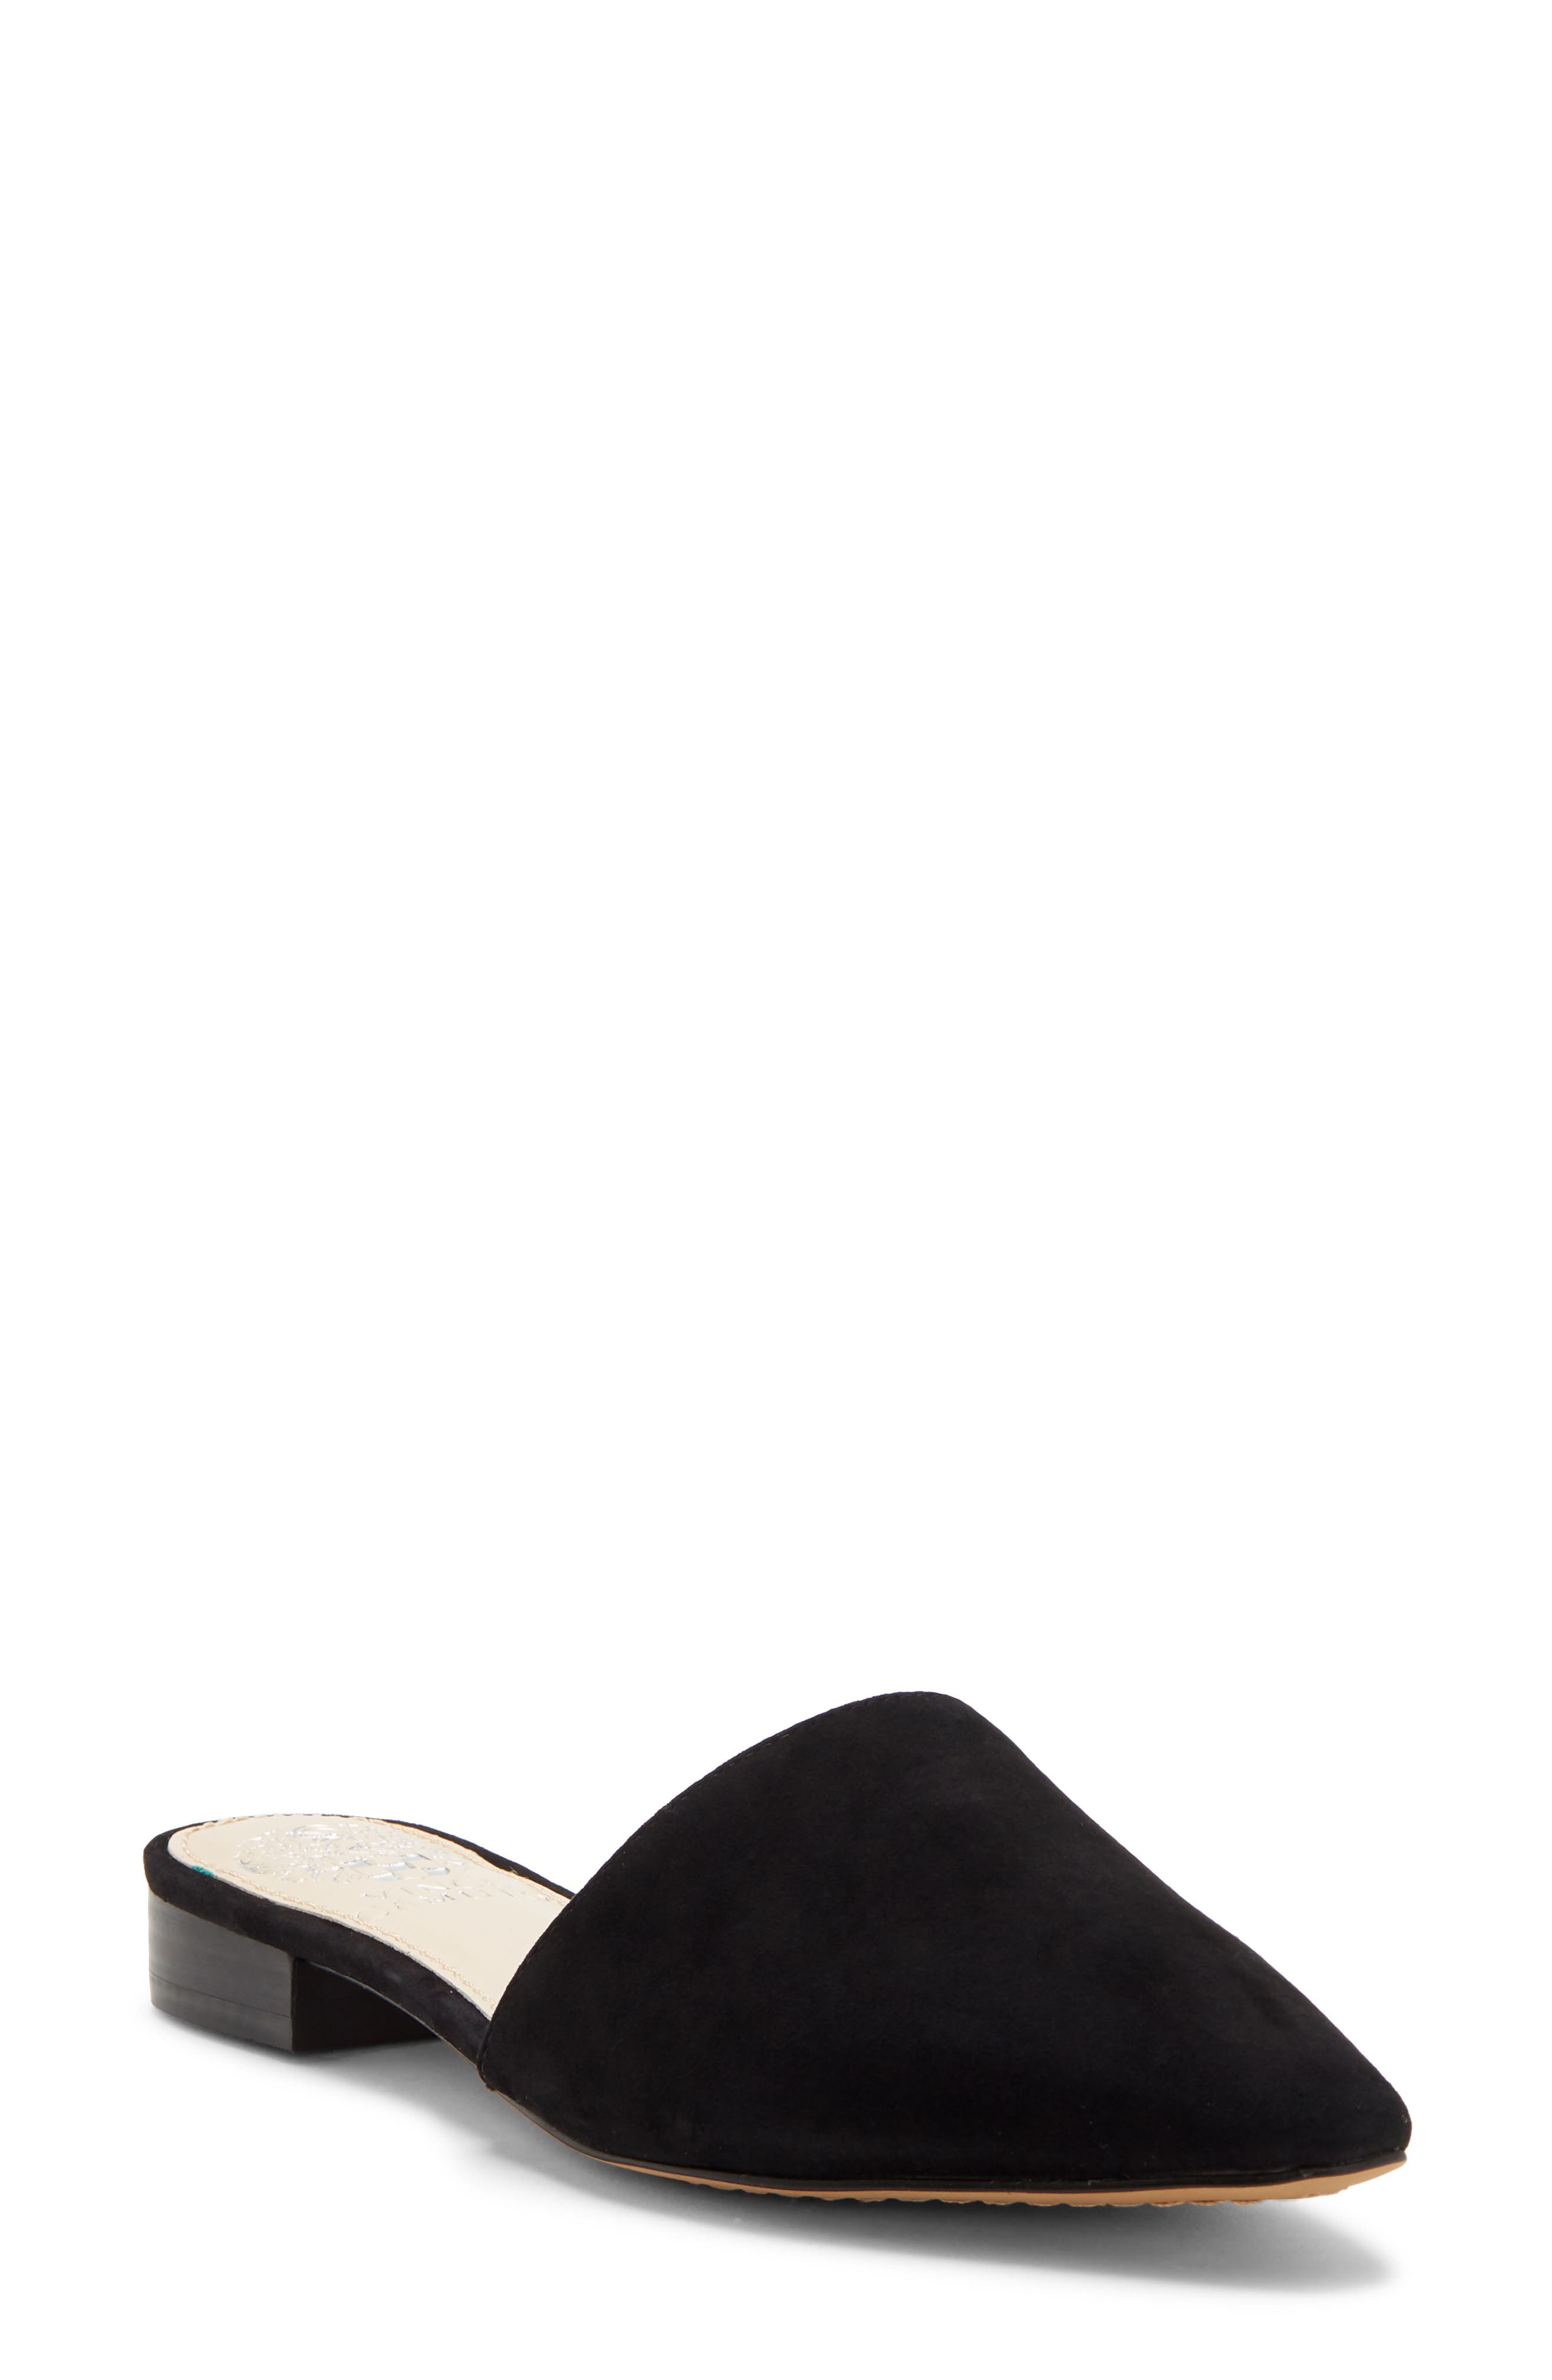 vince camuto white mules